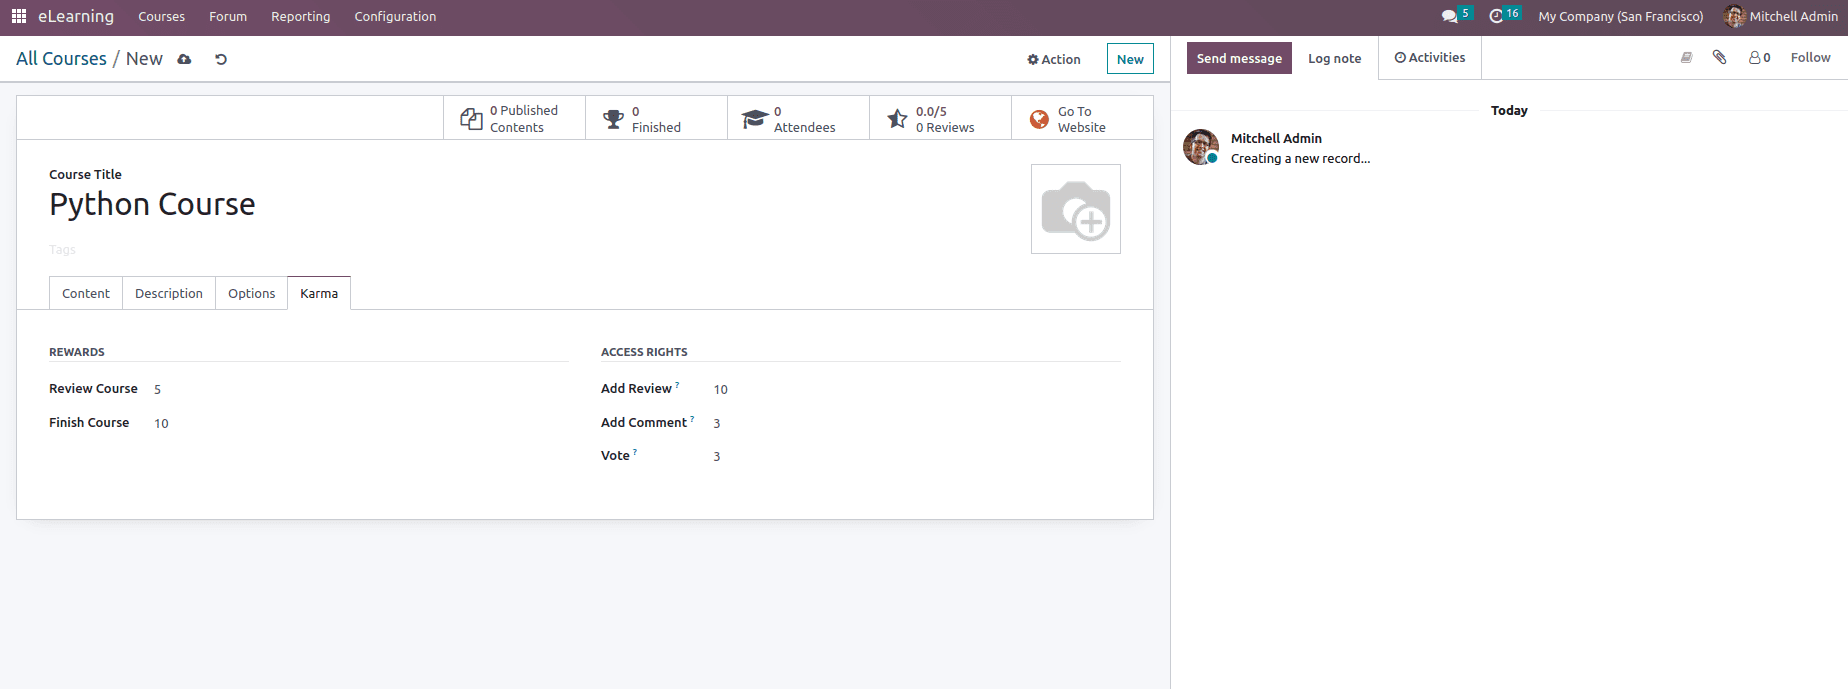 how-to-manage-the-odoo-16-elearning-module-8-cybrosys